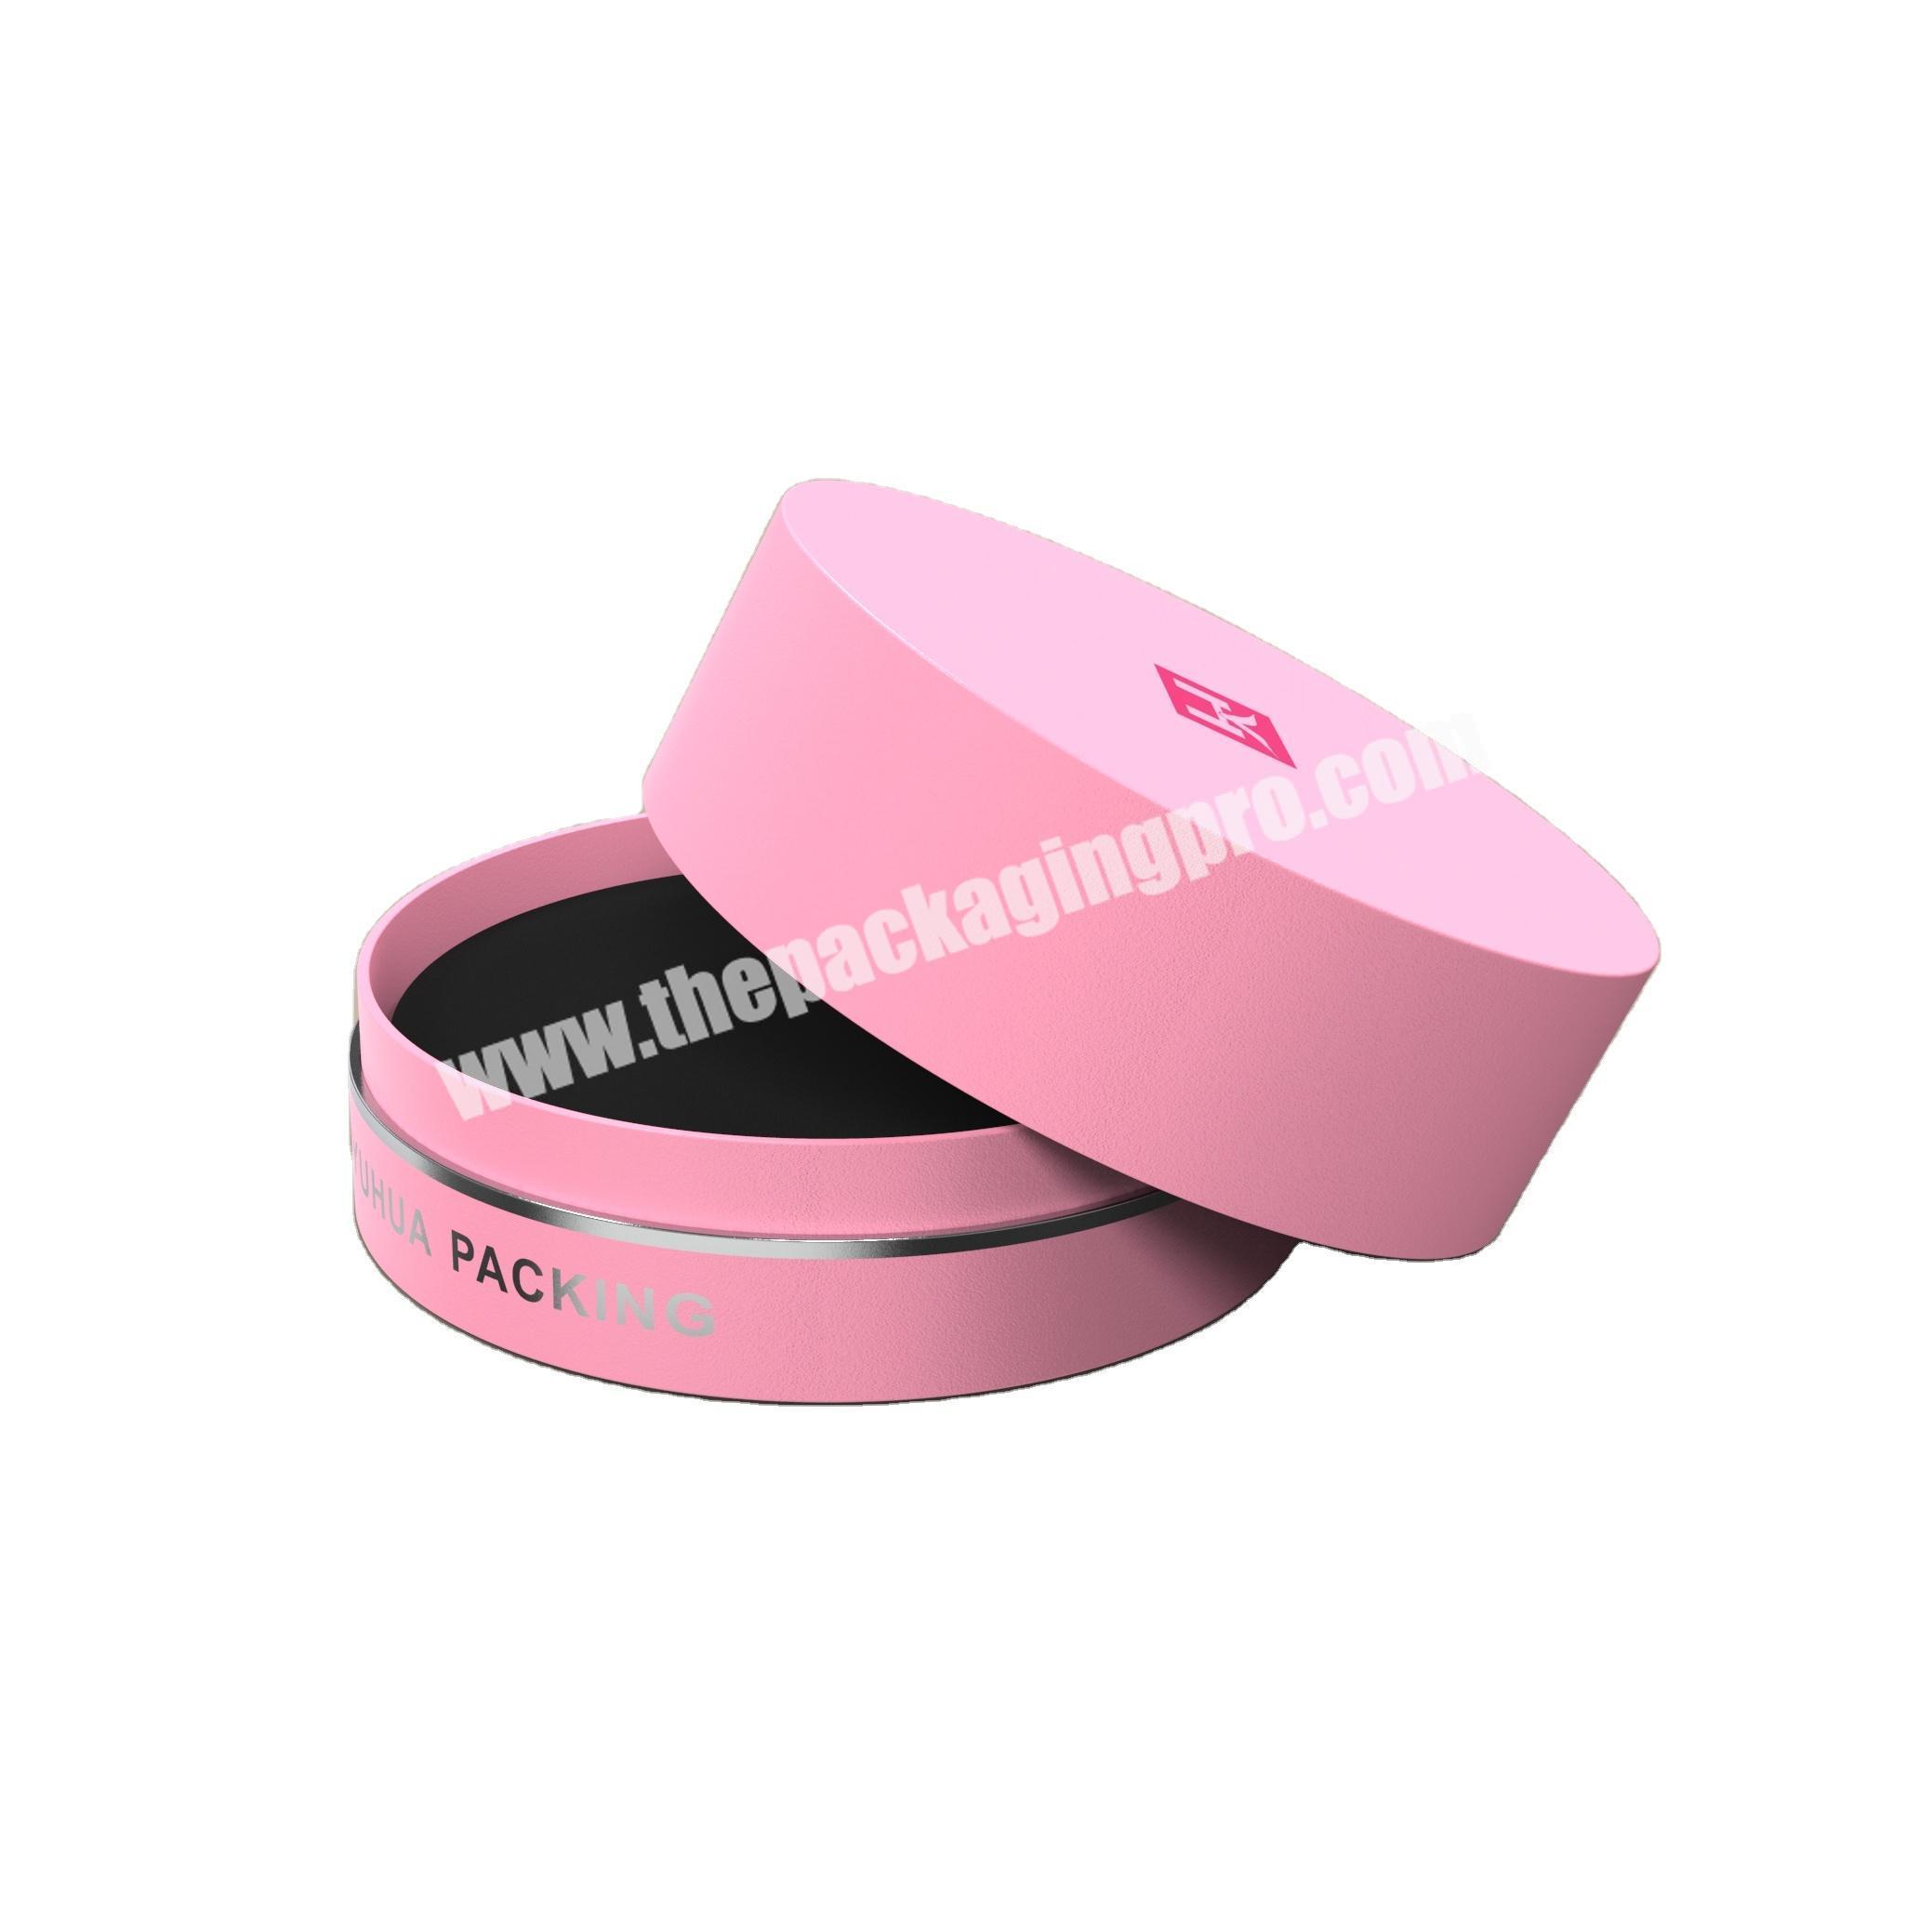 High quality customized Jewelry Lid and bottom paper box with logo 2 pieces Top and base gift boxes for Ring Earrings Necklace